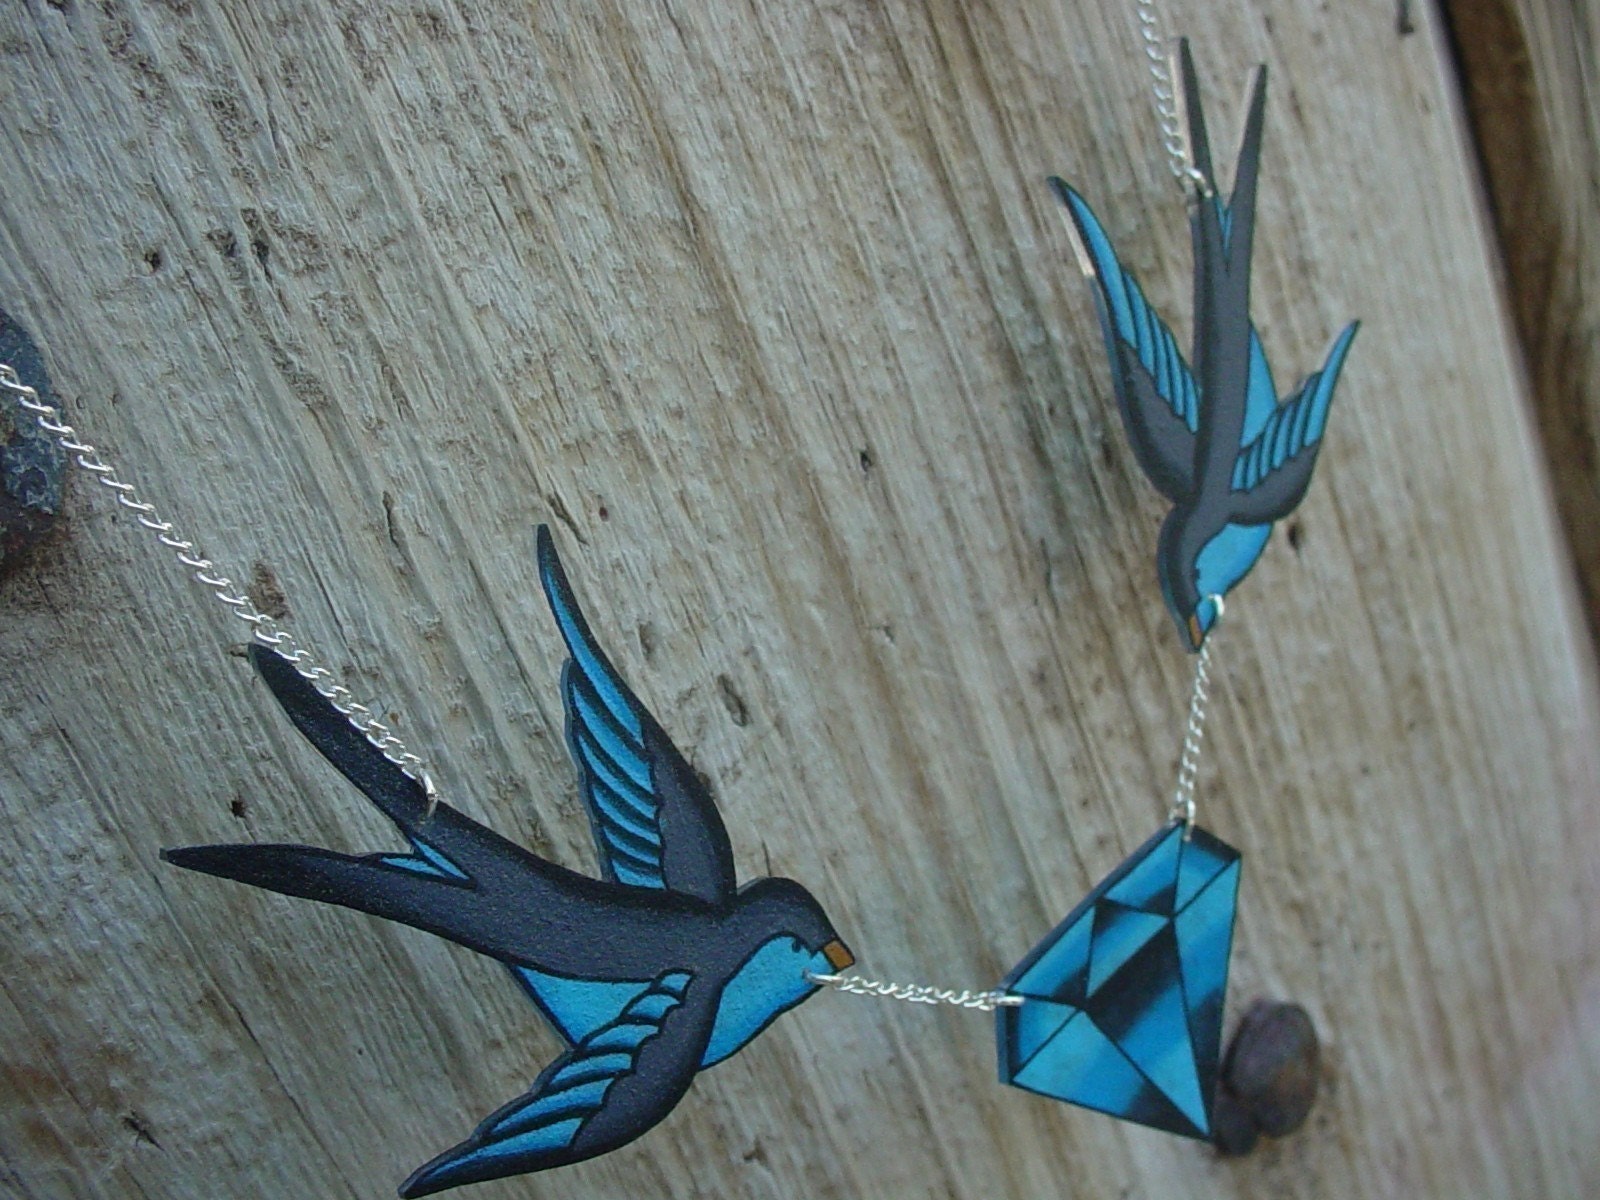 tattoo inspired blue and grey sparrows holding diamond necklace